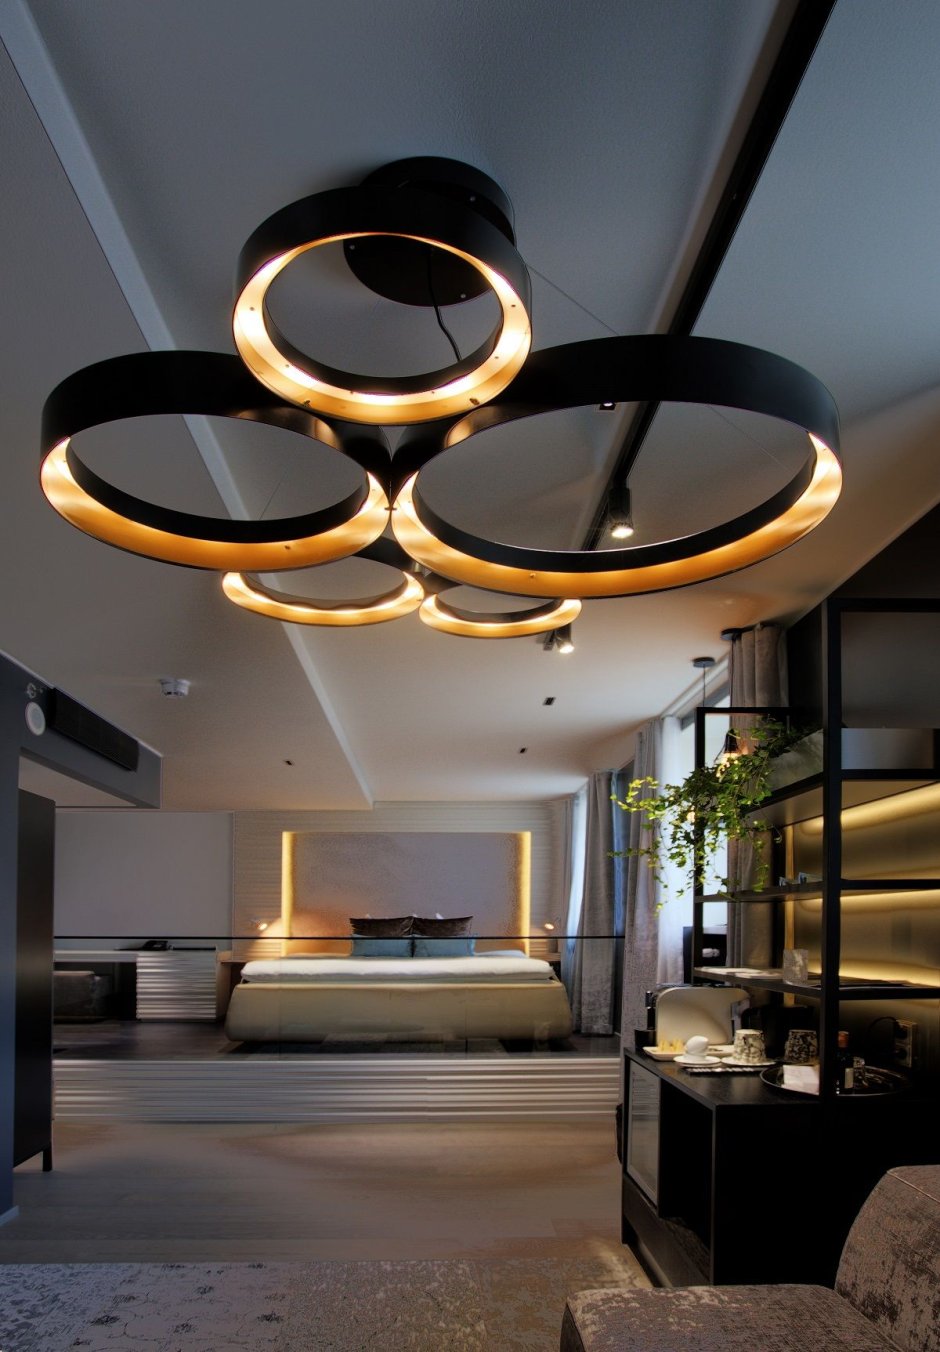 Modern ceiling lamps in the interior